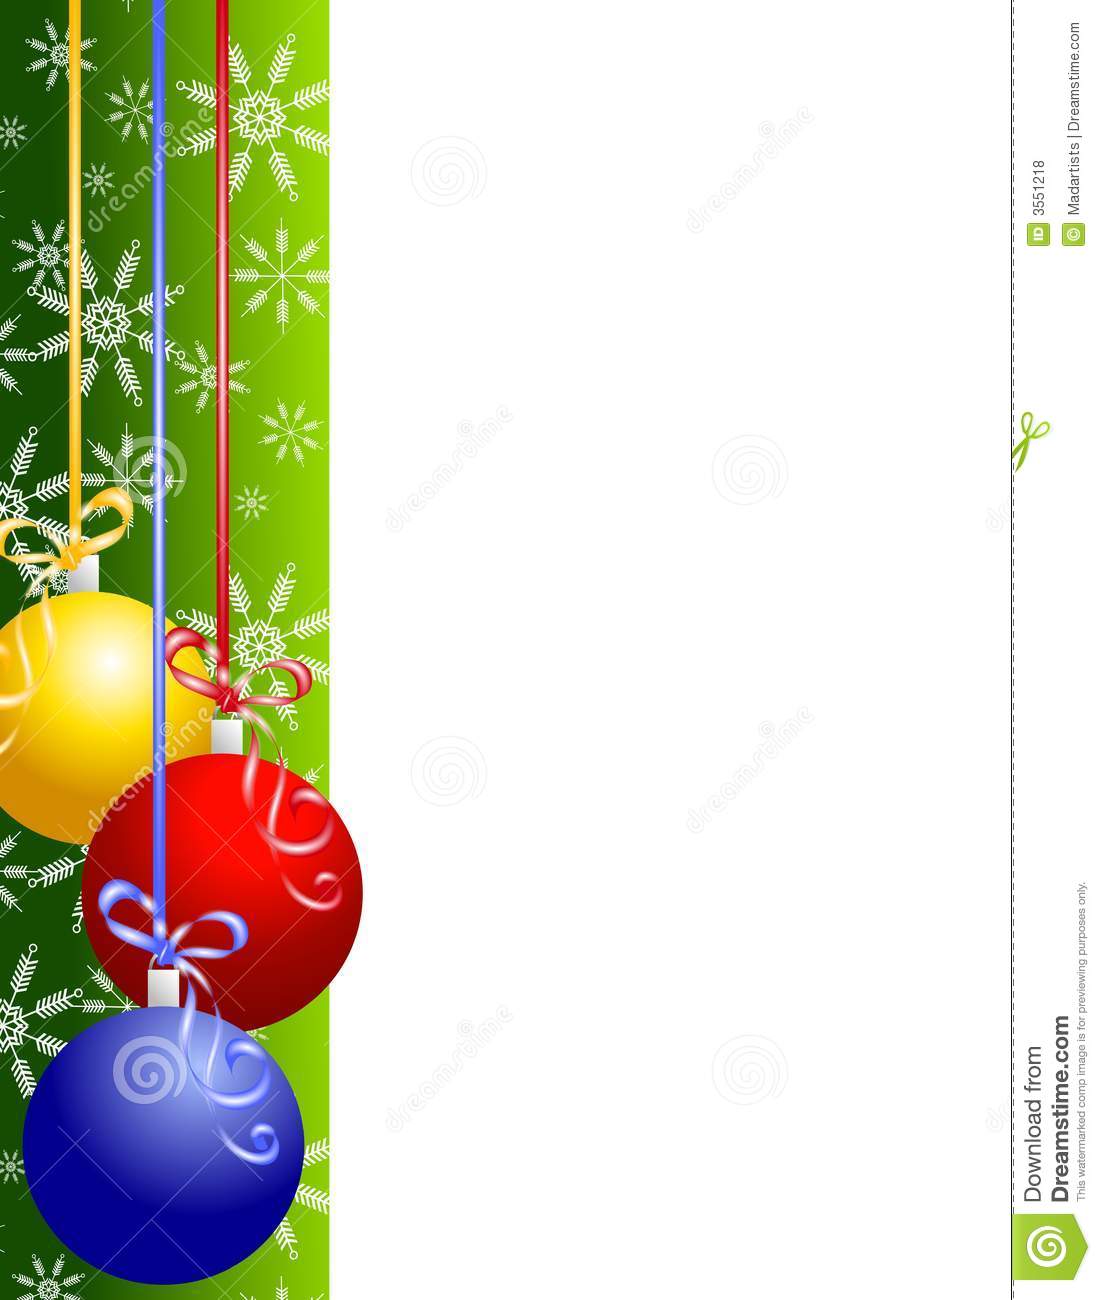 Christmas Border Clipart   Clipart Panda   Free Clipart Images